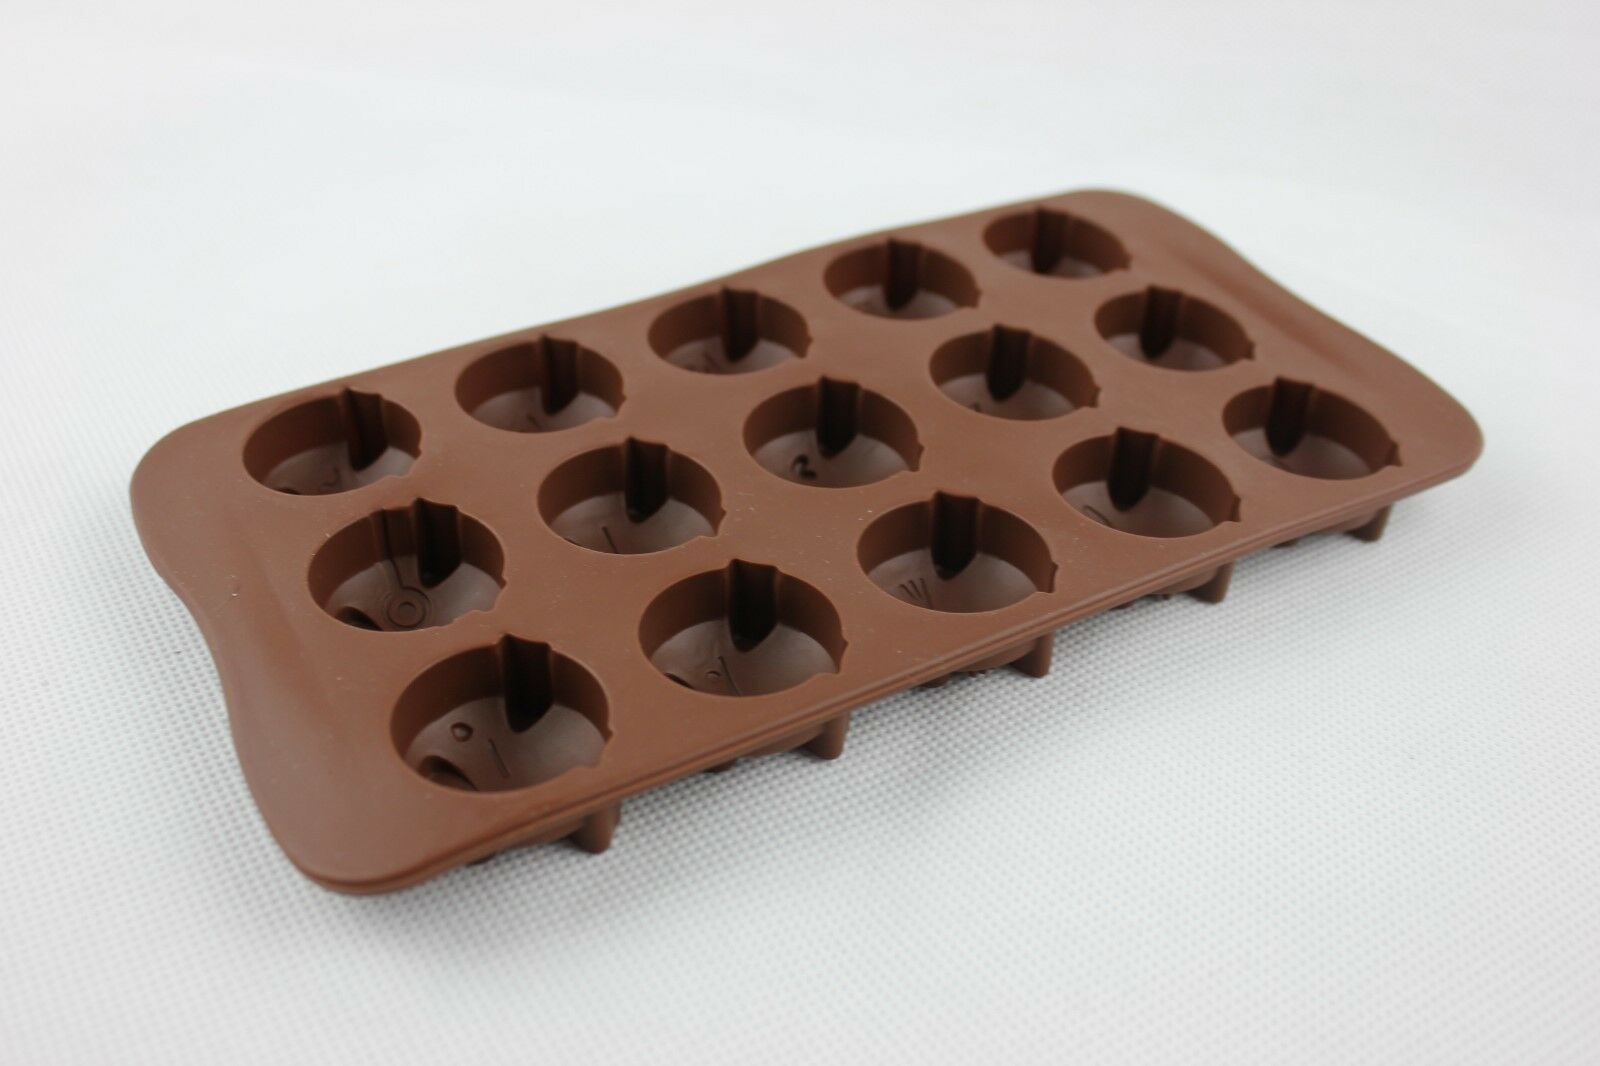 attachment-https://www.cupcakeaddicts.co.uk/wp-content/uploads/imported/4/Pig-Faces-Emoji-Silicone-Chocolate-Mould-15-CellJelly-Ice-Cube-Soap-Candle-Tray-323363295994-5.jpg